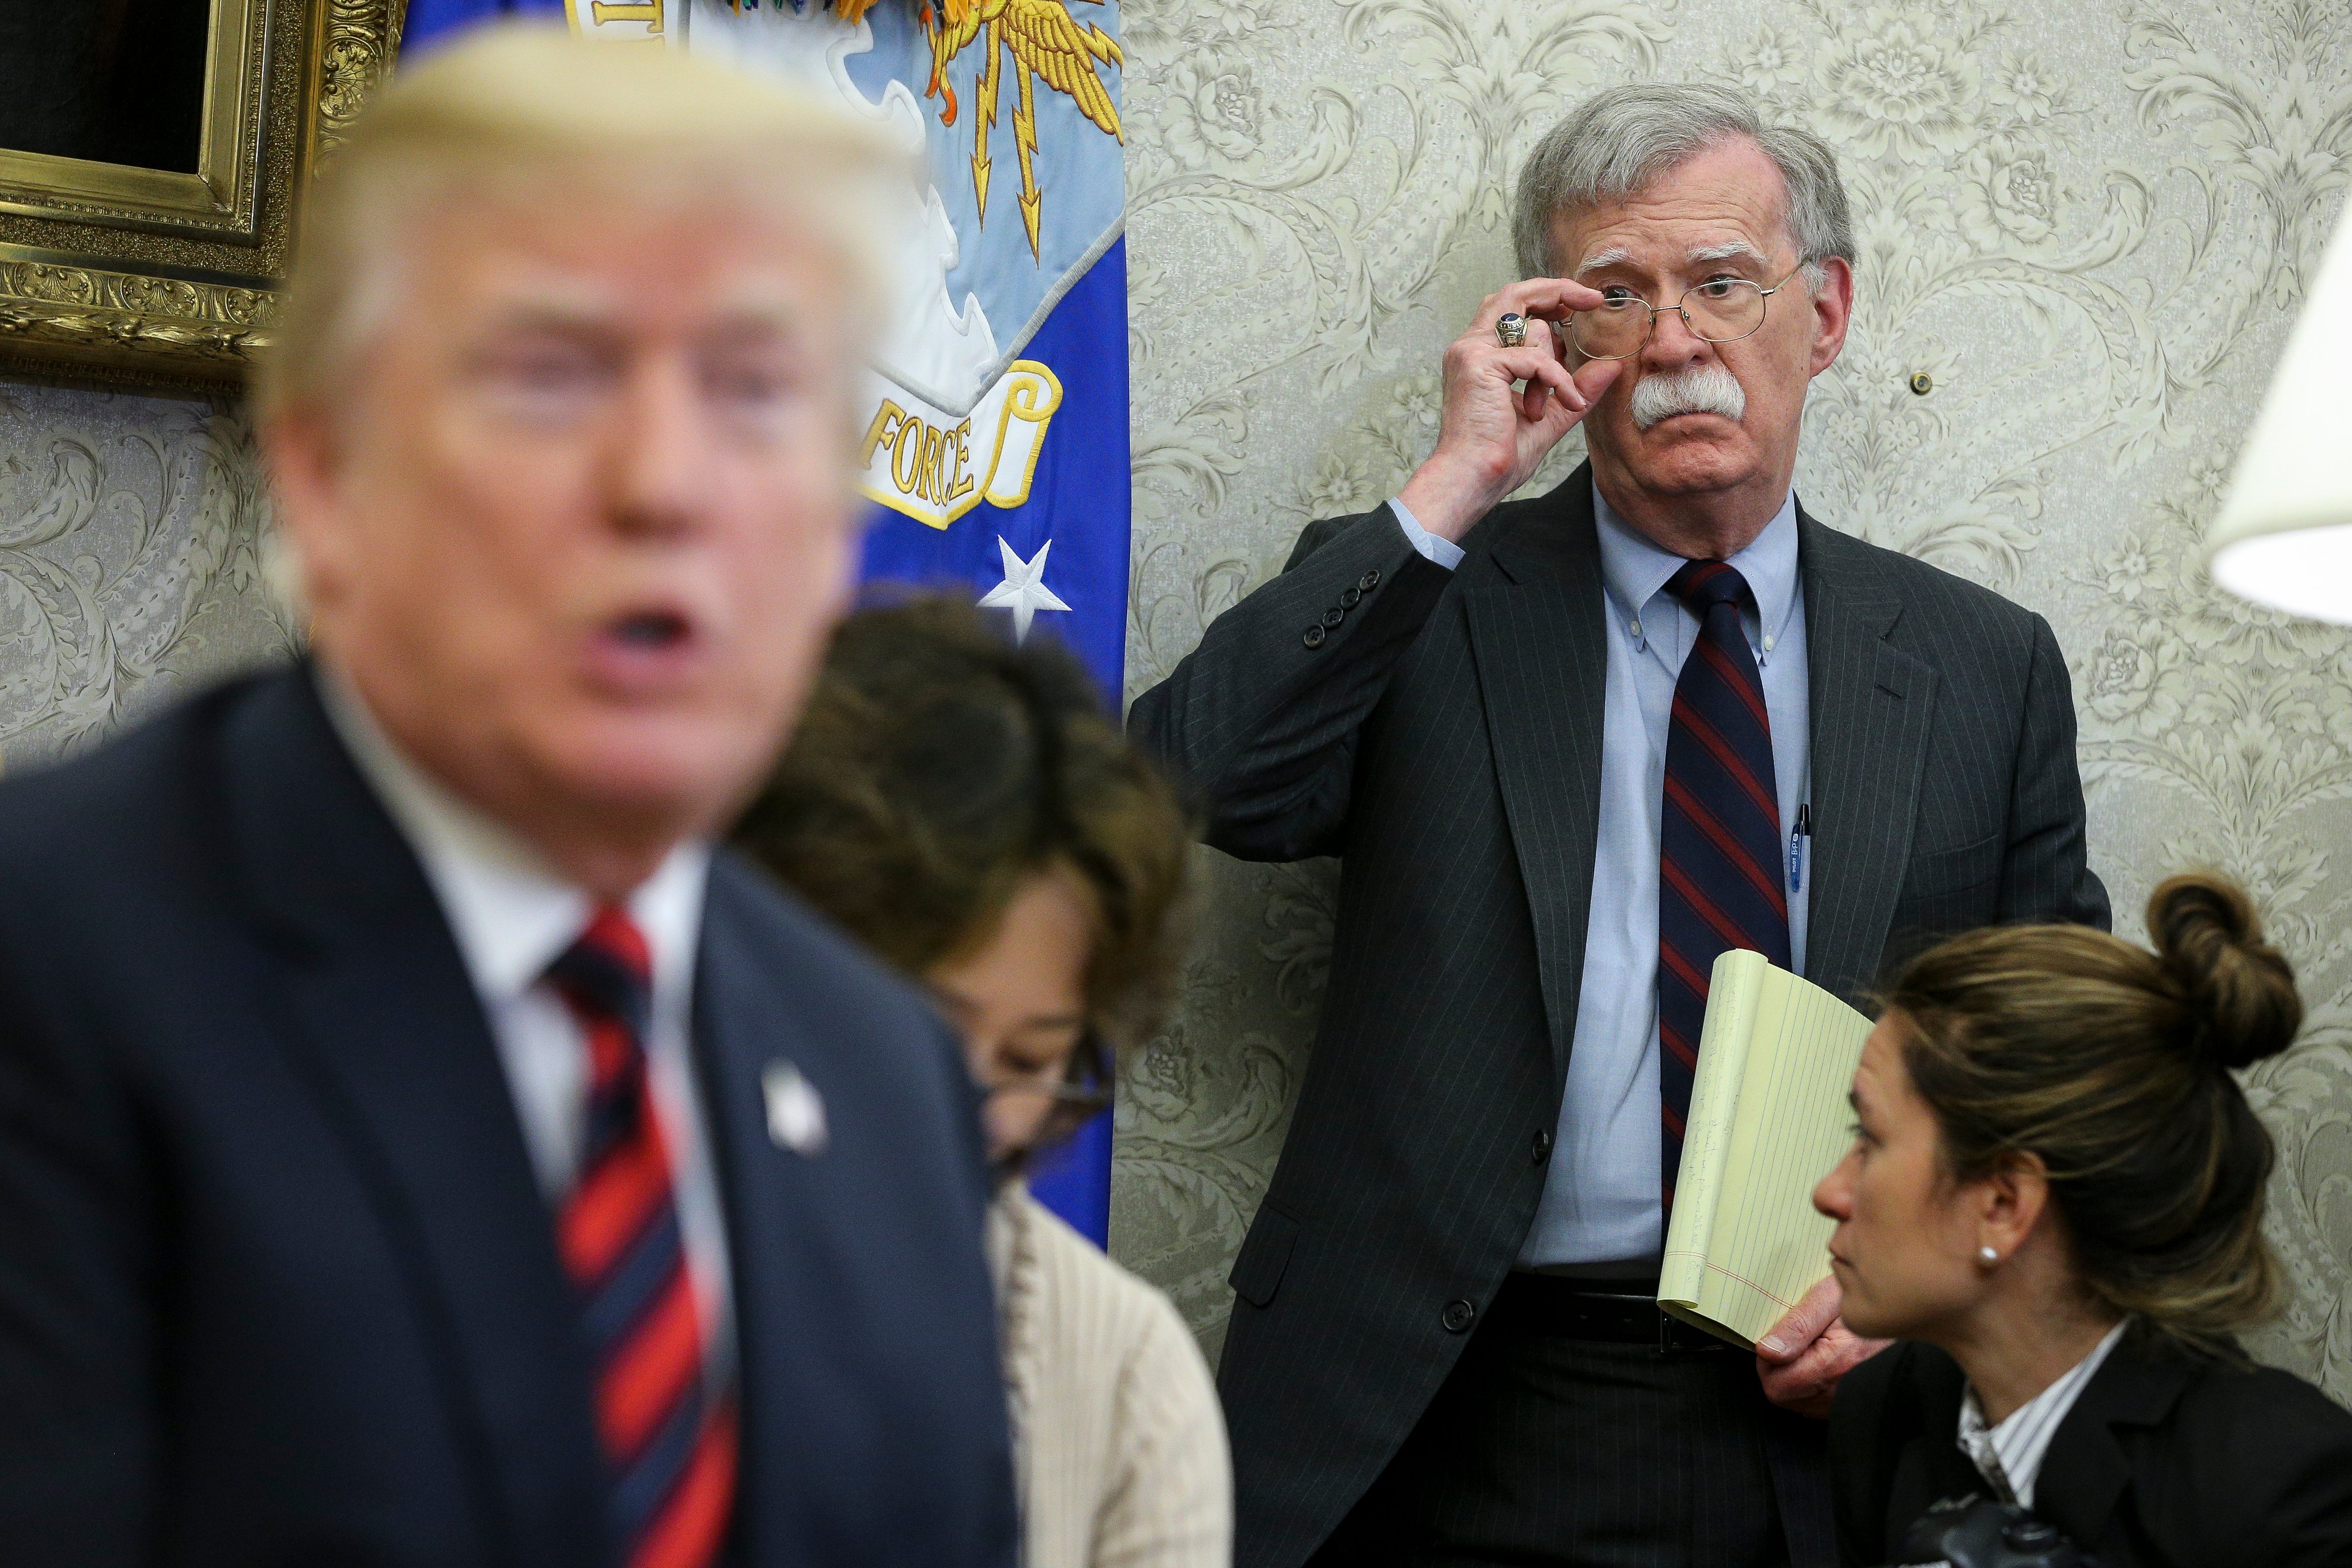 WASHINGTON, DC - MAY 22: US President Donald Trump speaks as National security advisor John Bolton listens during a meeting with South Korean President Moon Jae-in, in the Oval Office of the White House on May 22, 2018 in Washington DC. (Photo by Oliver Contreras-Pool/Getty Images)